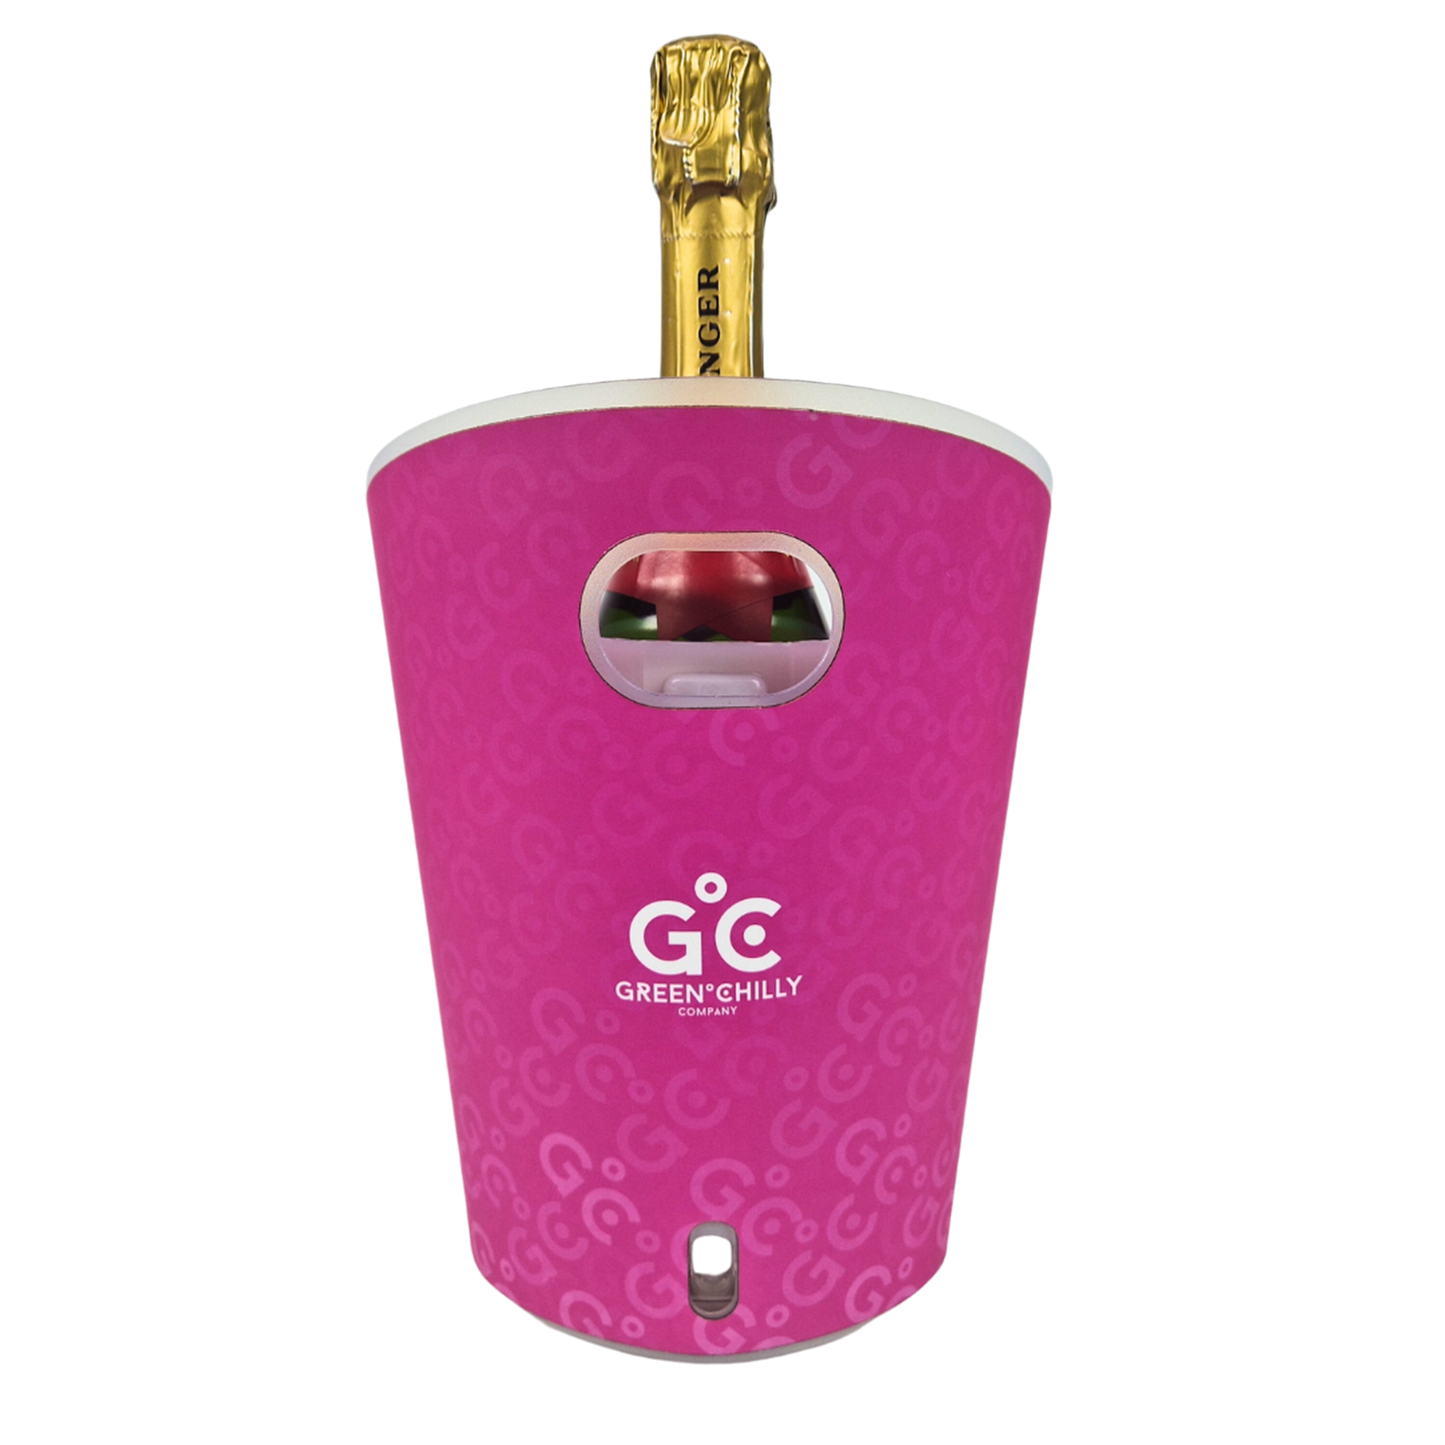 Pink Fwrap Wine Cooler - Includes two Fwrap cool packs